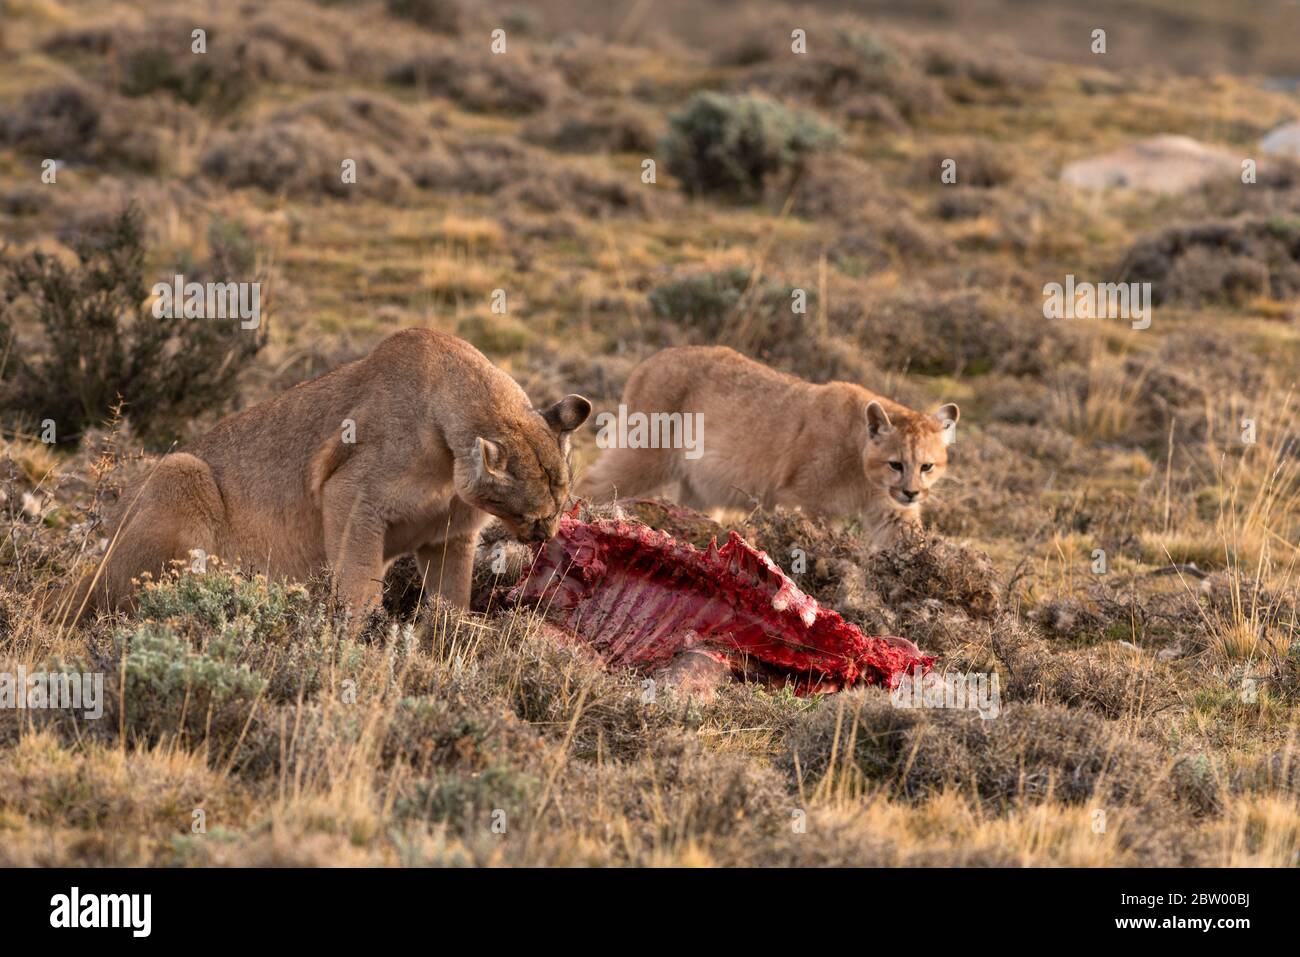 A Puma (Puma concolor) and its cub eating a Guanaco near Torres del Paine, Chile Stock Photo